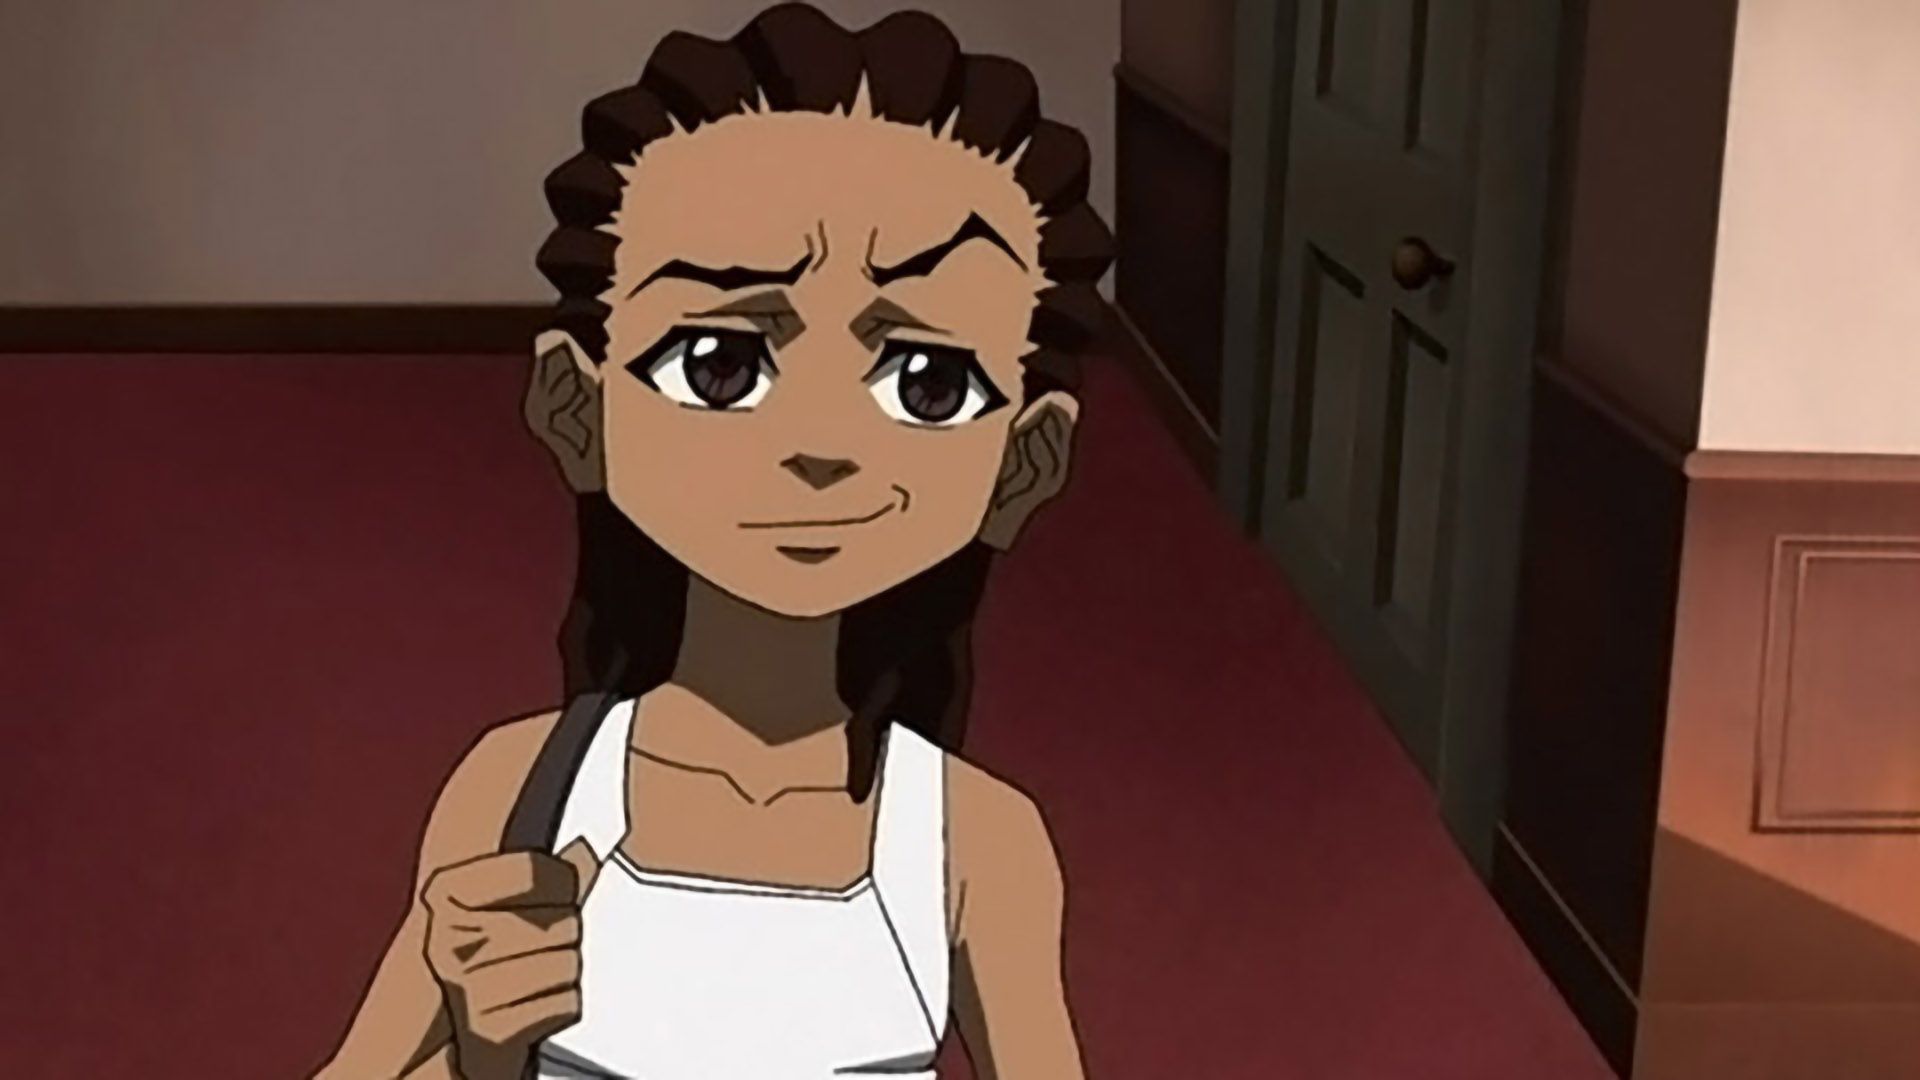 boondocks full episodes free It is very small and convenient for me to carr...